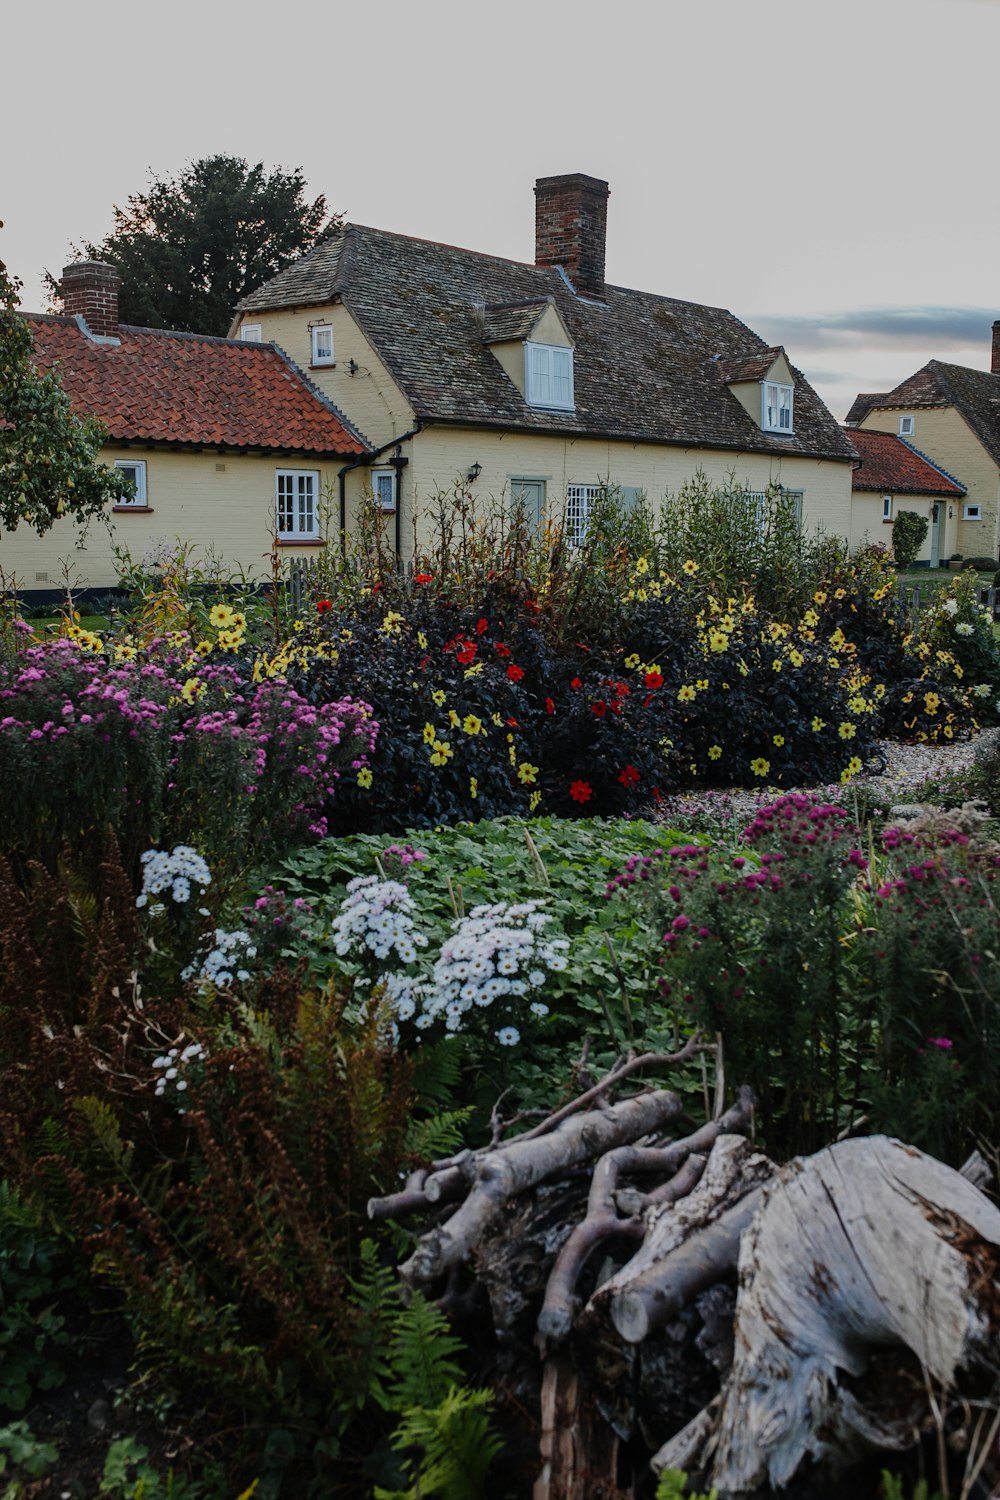 houses and flower garden during daytime